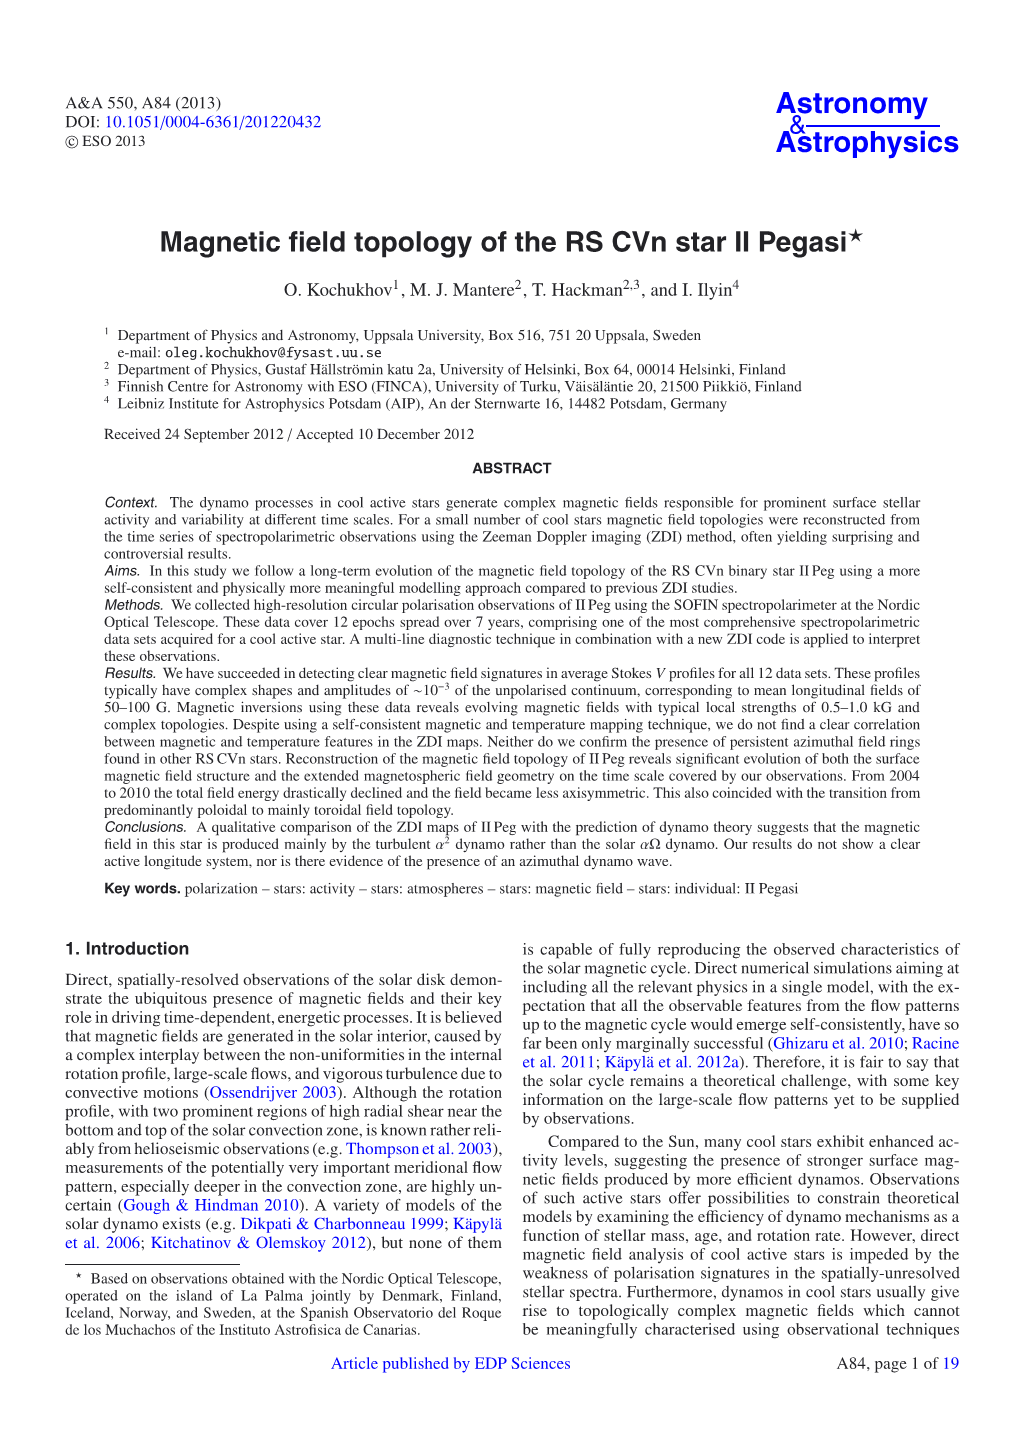 Magnetic Field Topology of the RS Cvn Star II Pegasi⋆